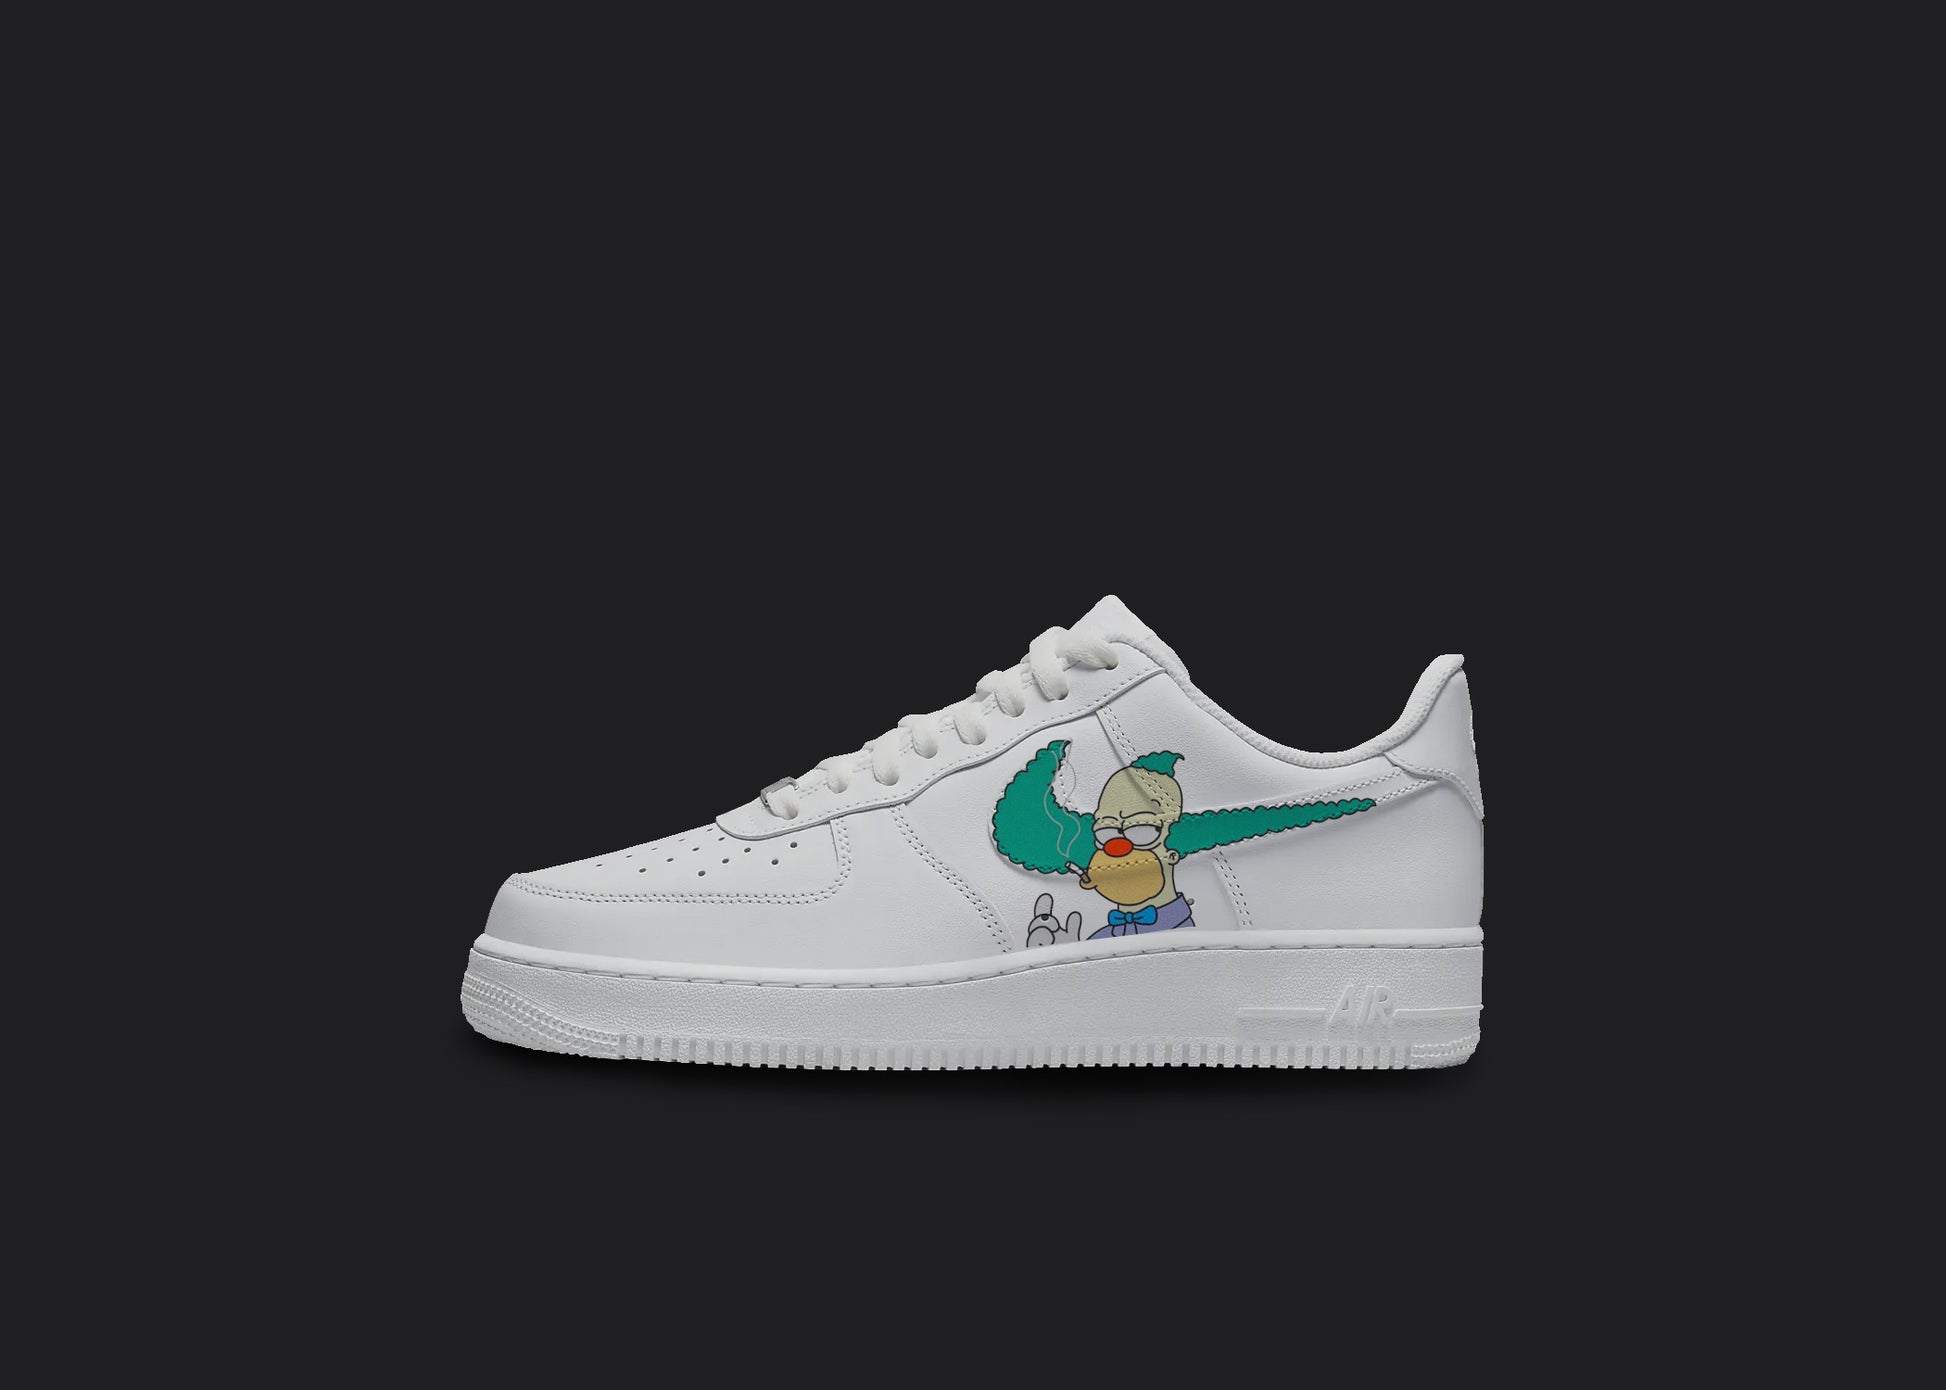 The image is of a Custom Nike Air force 1 sneaker on a blank black background. The white custom sneaker has a Isimpsons character krusty the clown as a nike logo.